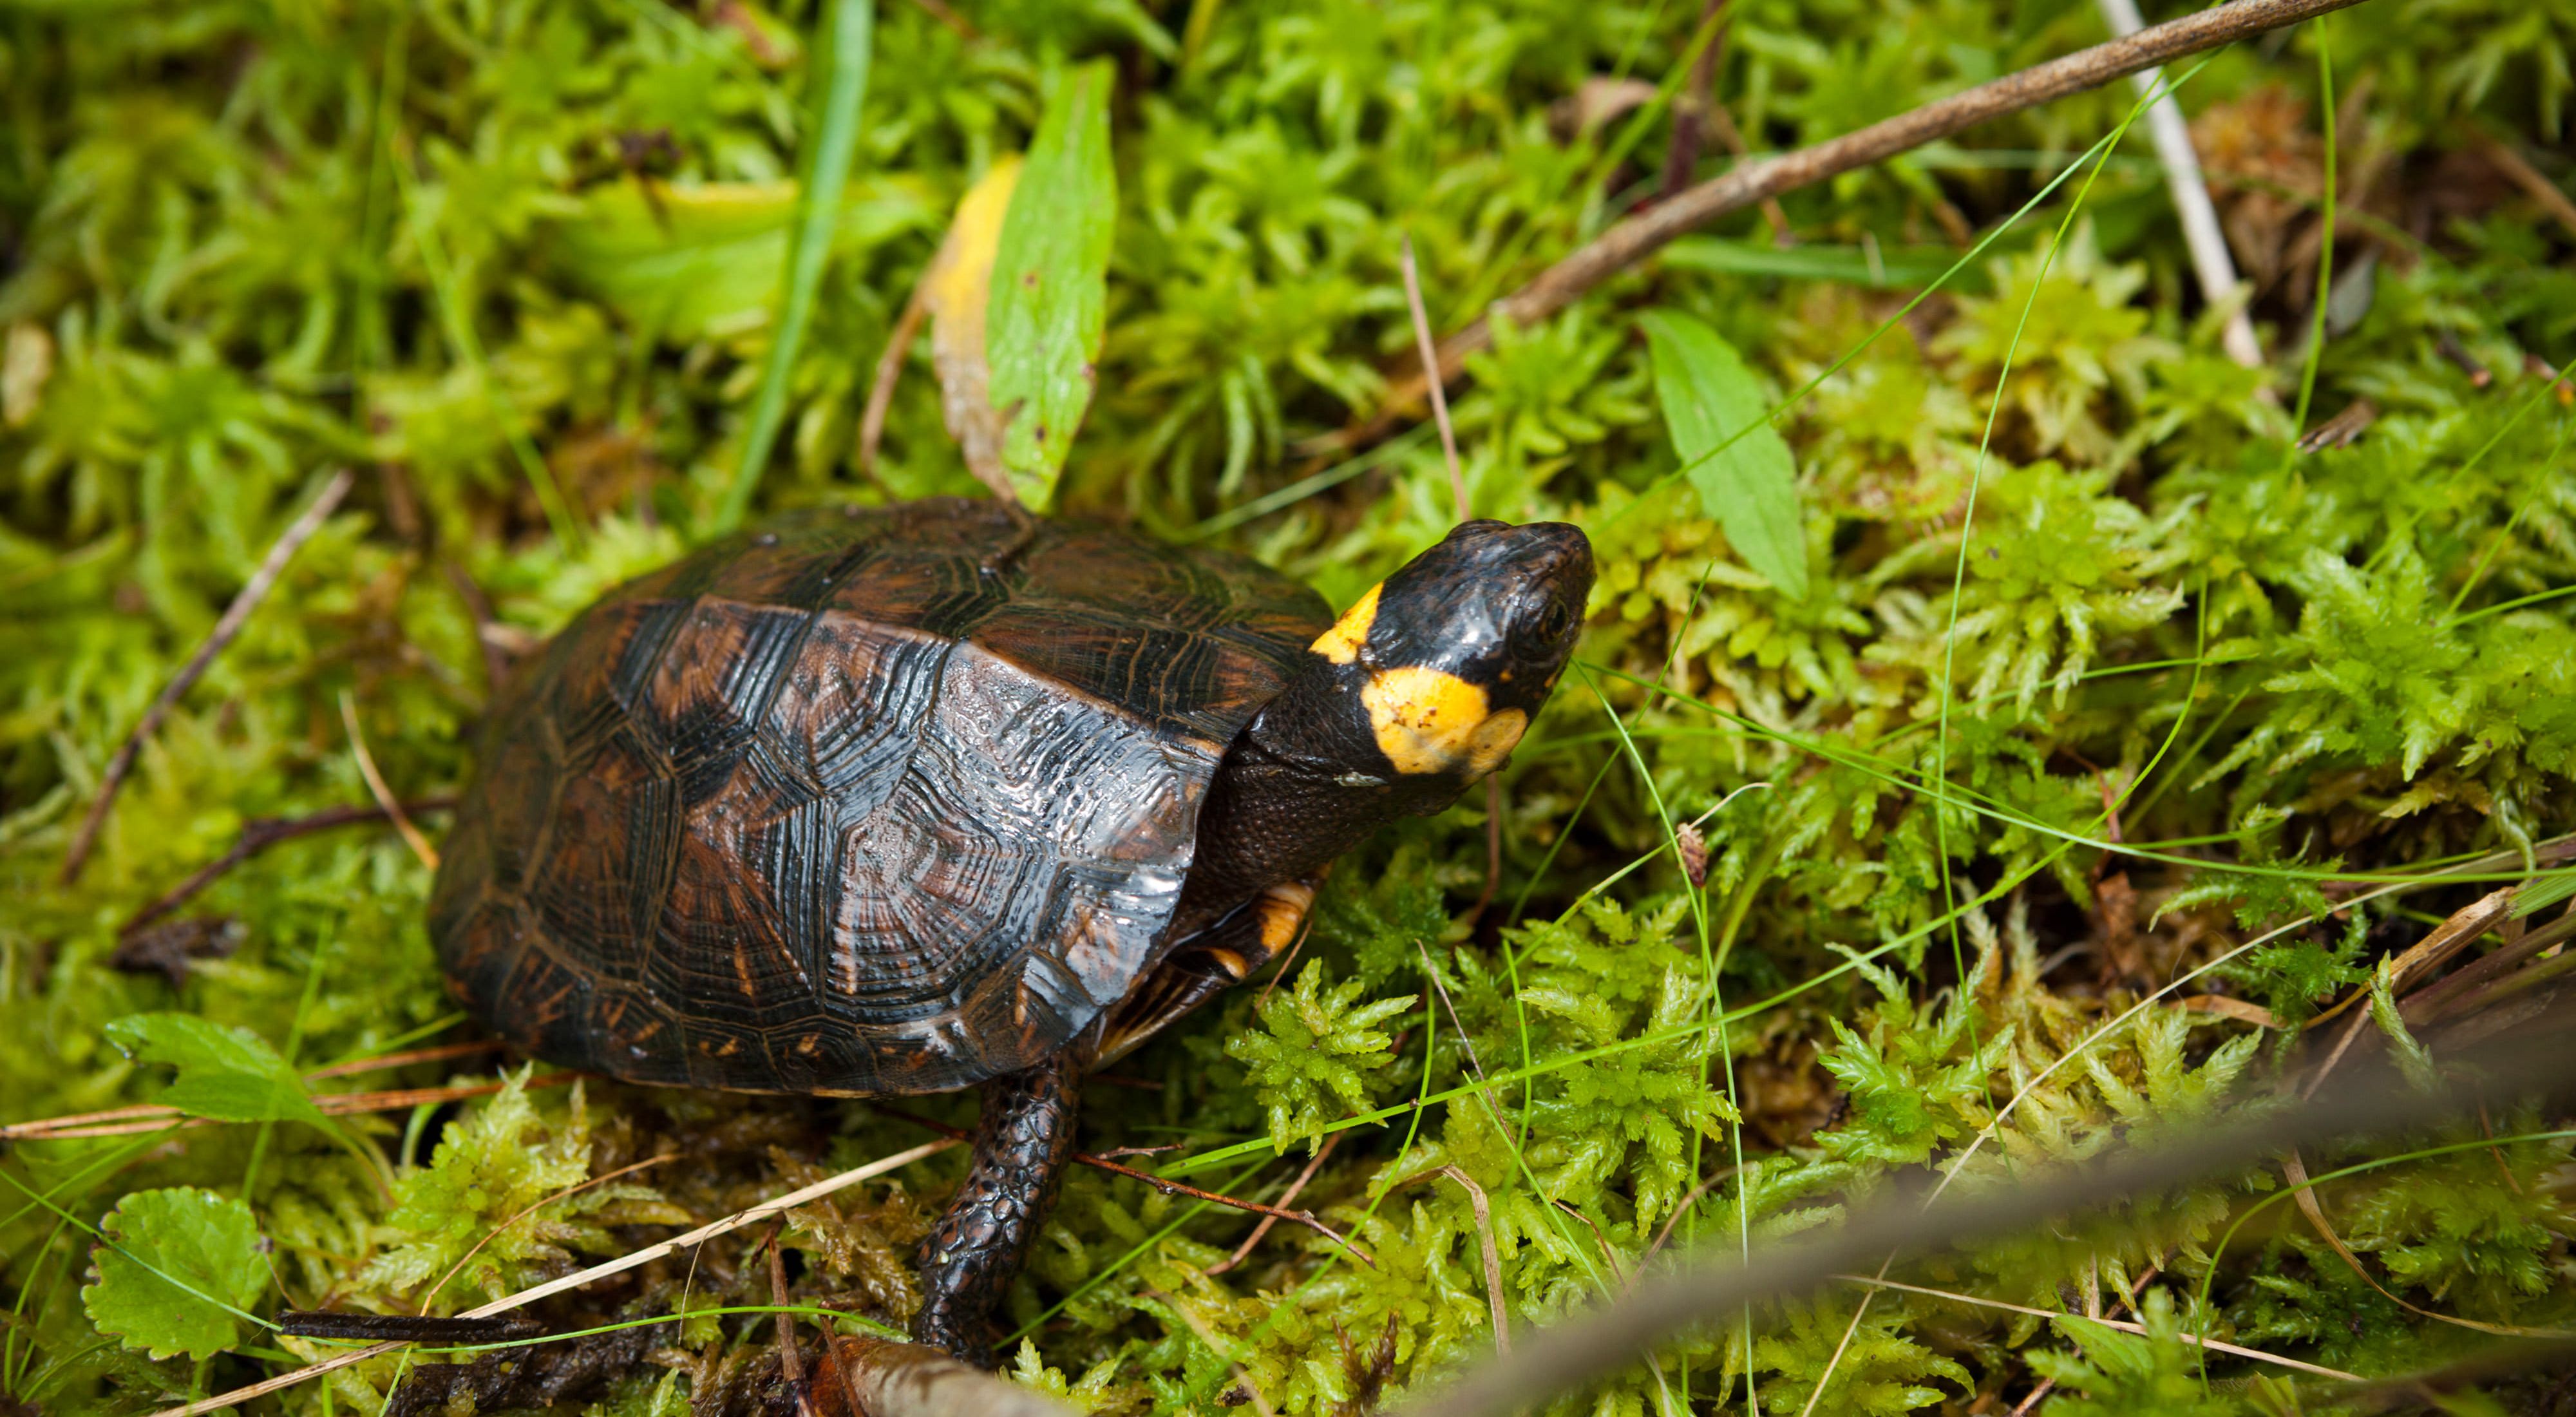 A small brown turtle with yellow spots on its head, sitting in wet moss.